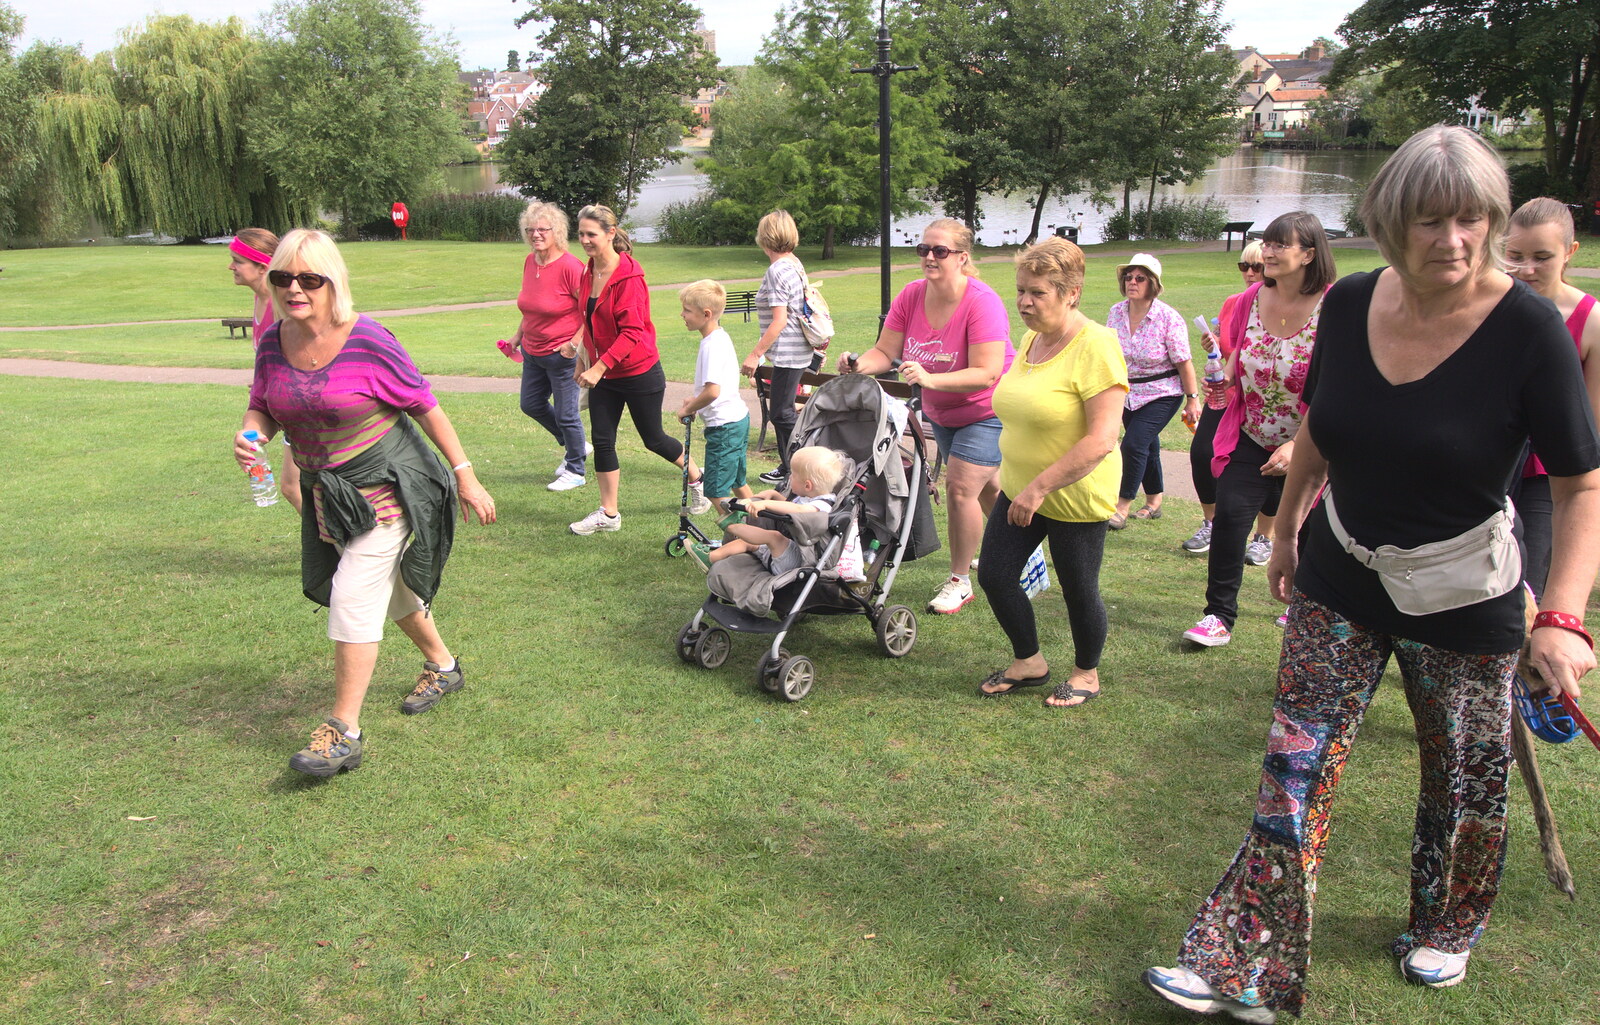 The walkers set off from A Race For Life, The Park, Diss, Norfolk - 16th August 2015